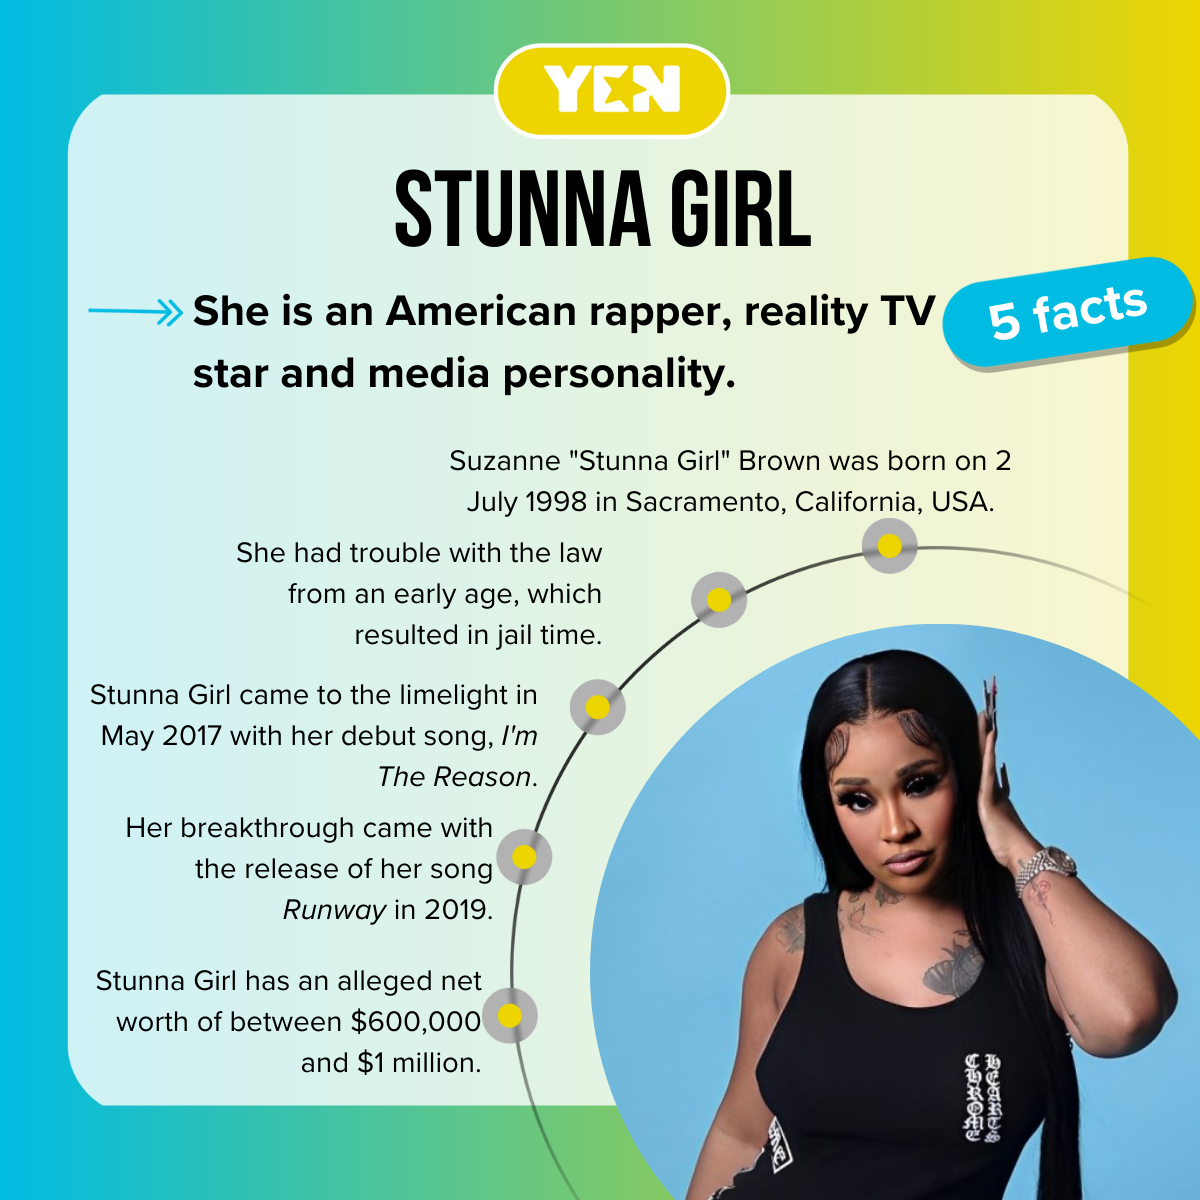 Five facts about Stunna Girl.